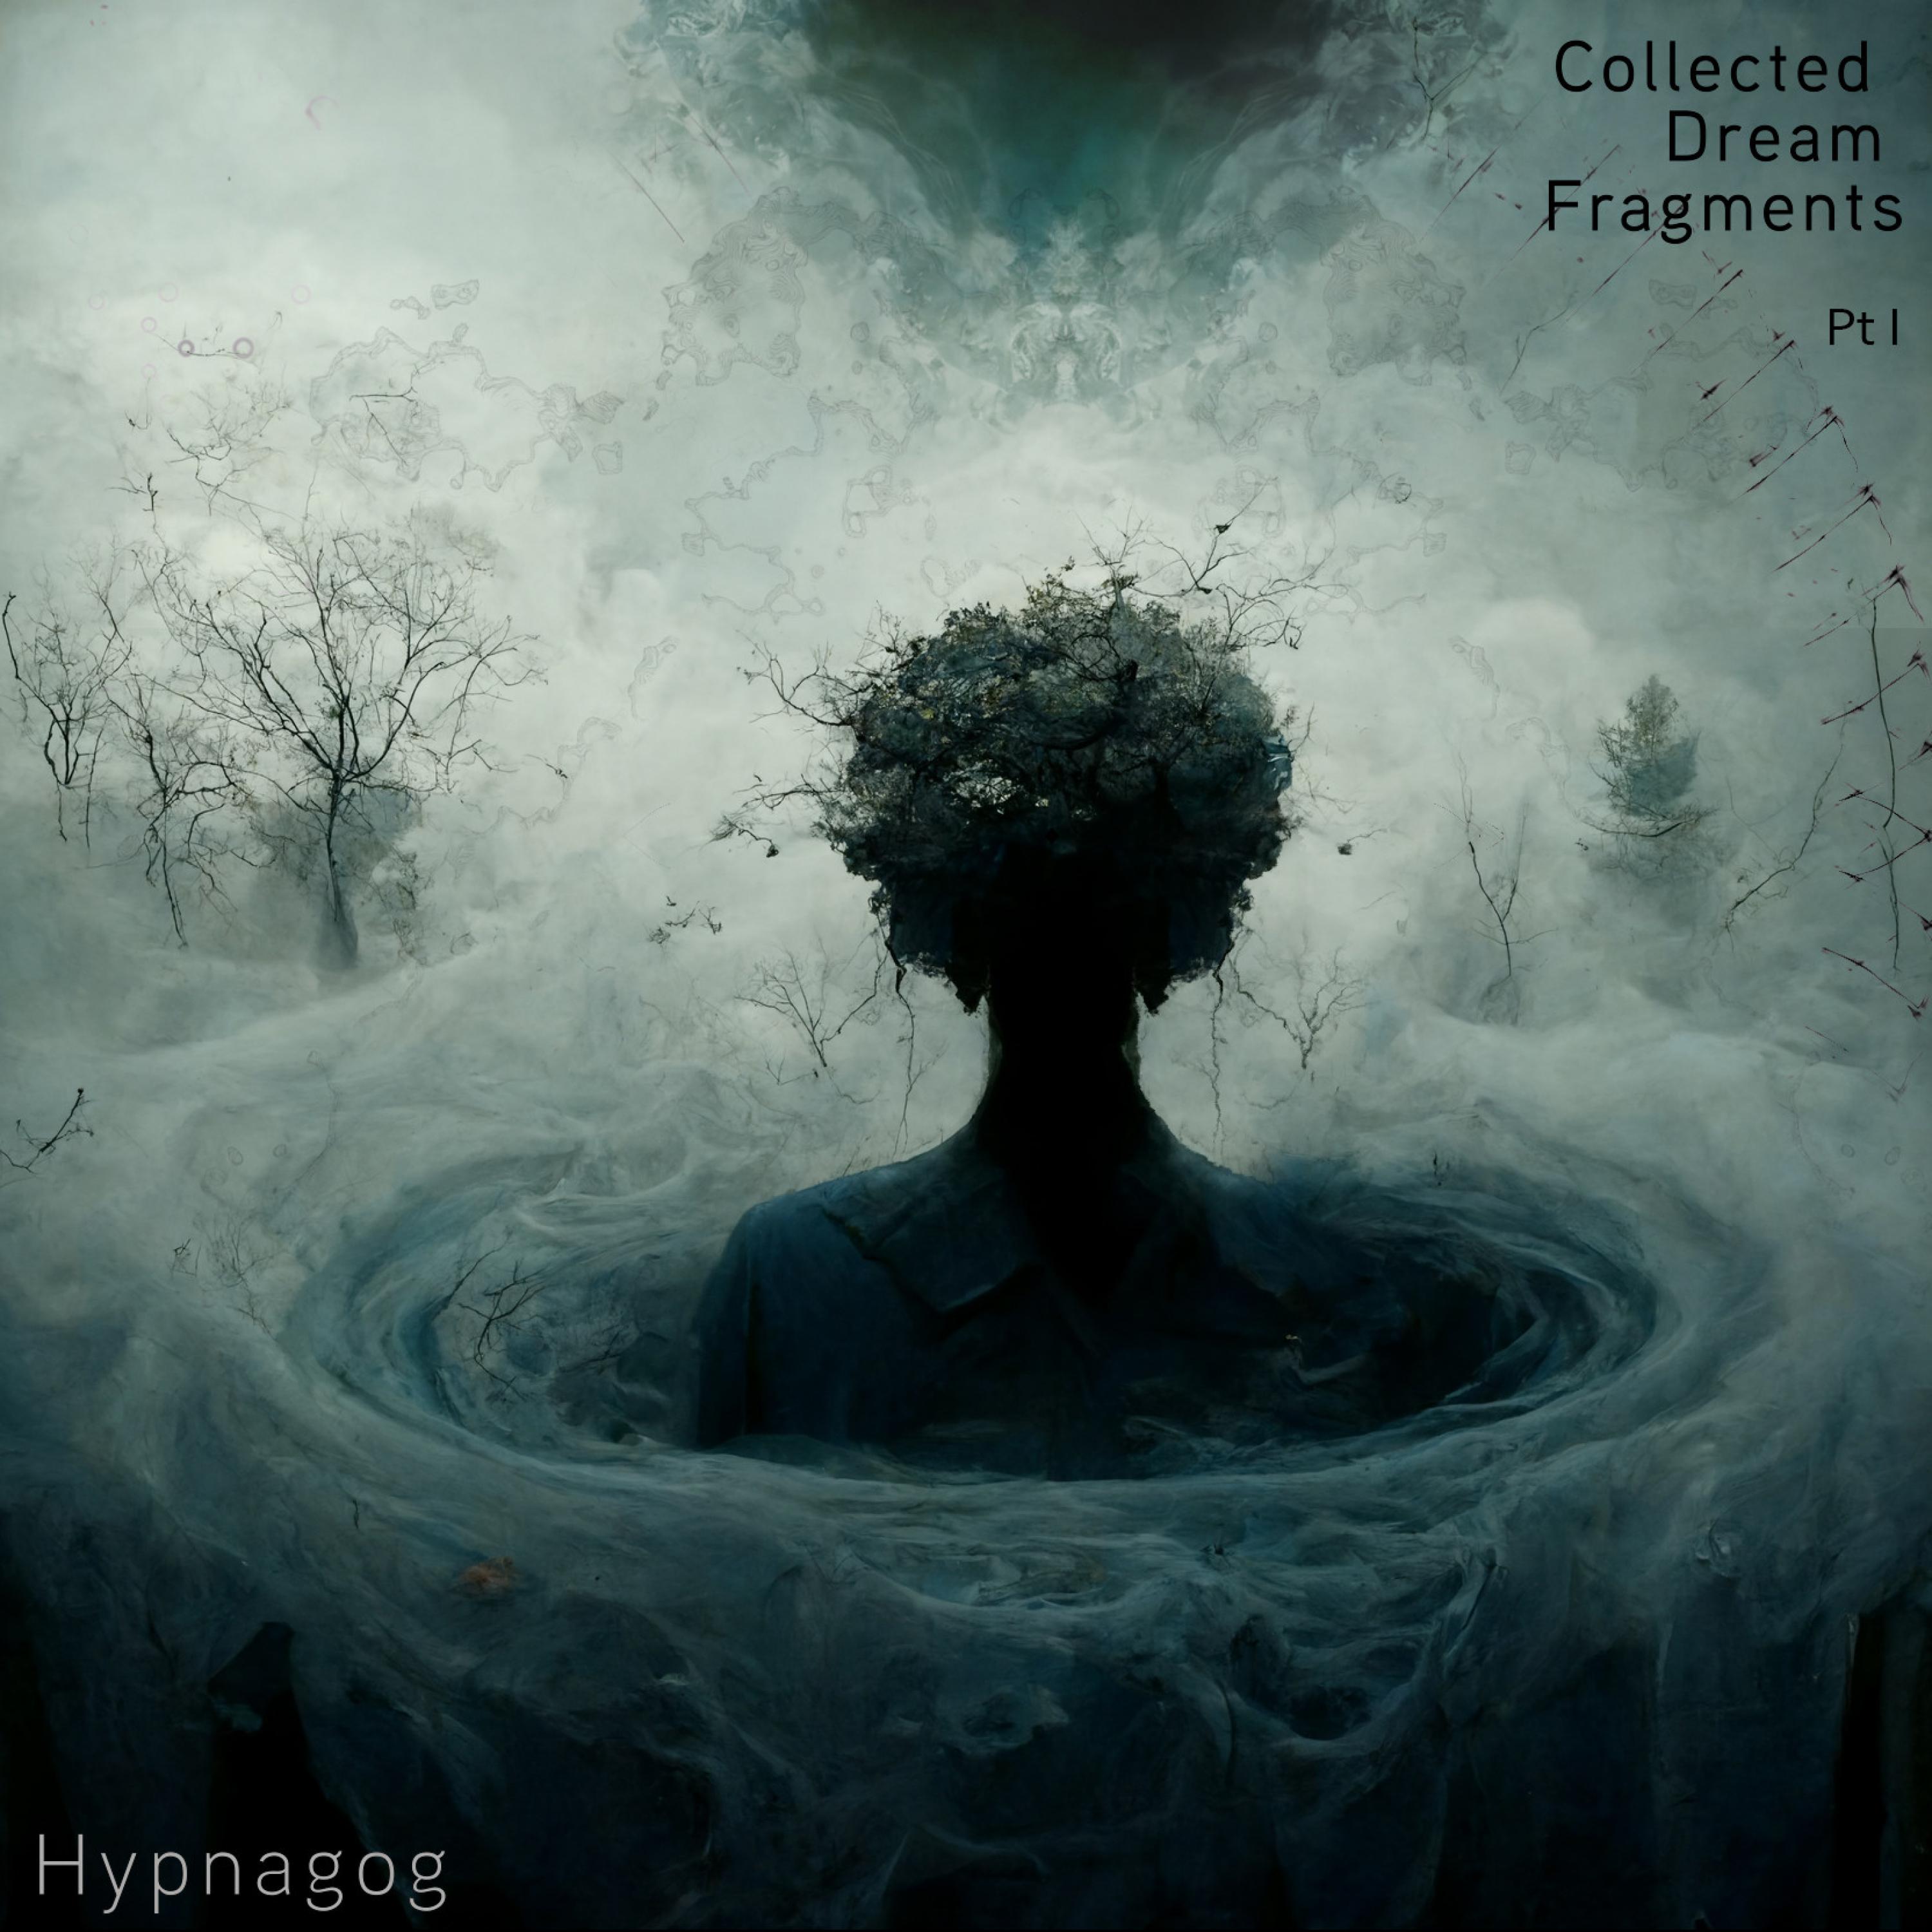 Hypnagog - The very tiniest pieces